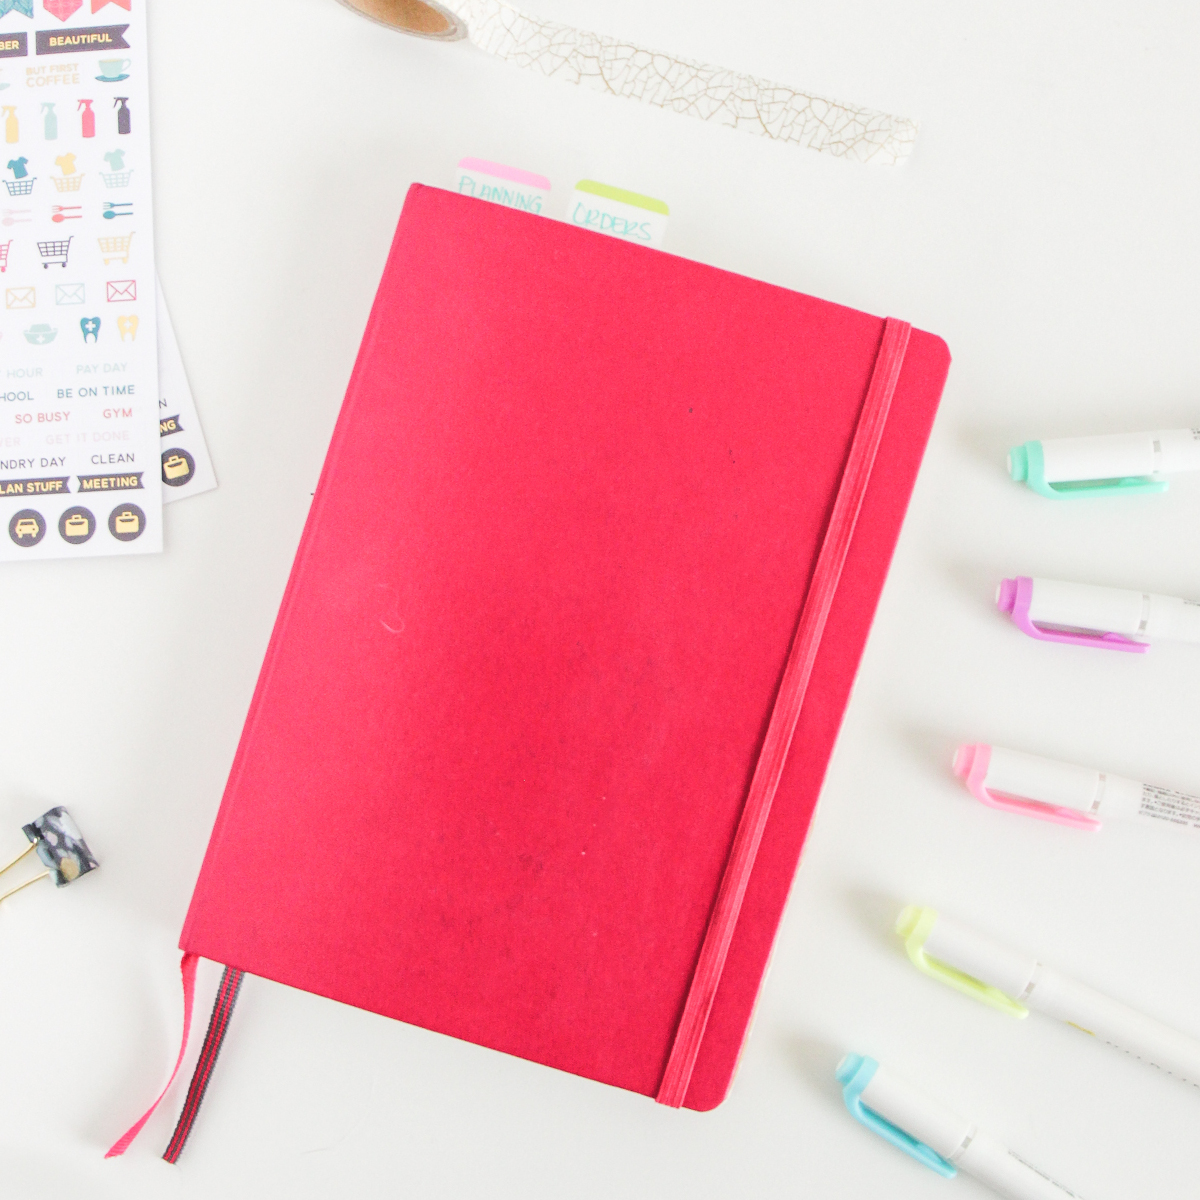 11 Irresistible Supplies That Will Make You Fall in Love with Bullet Journaling